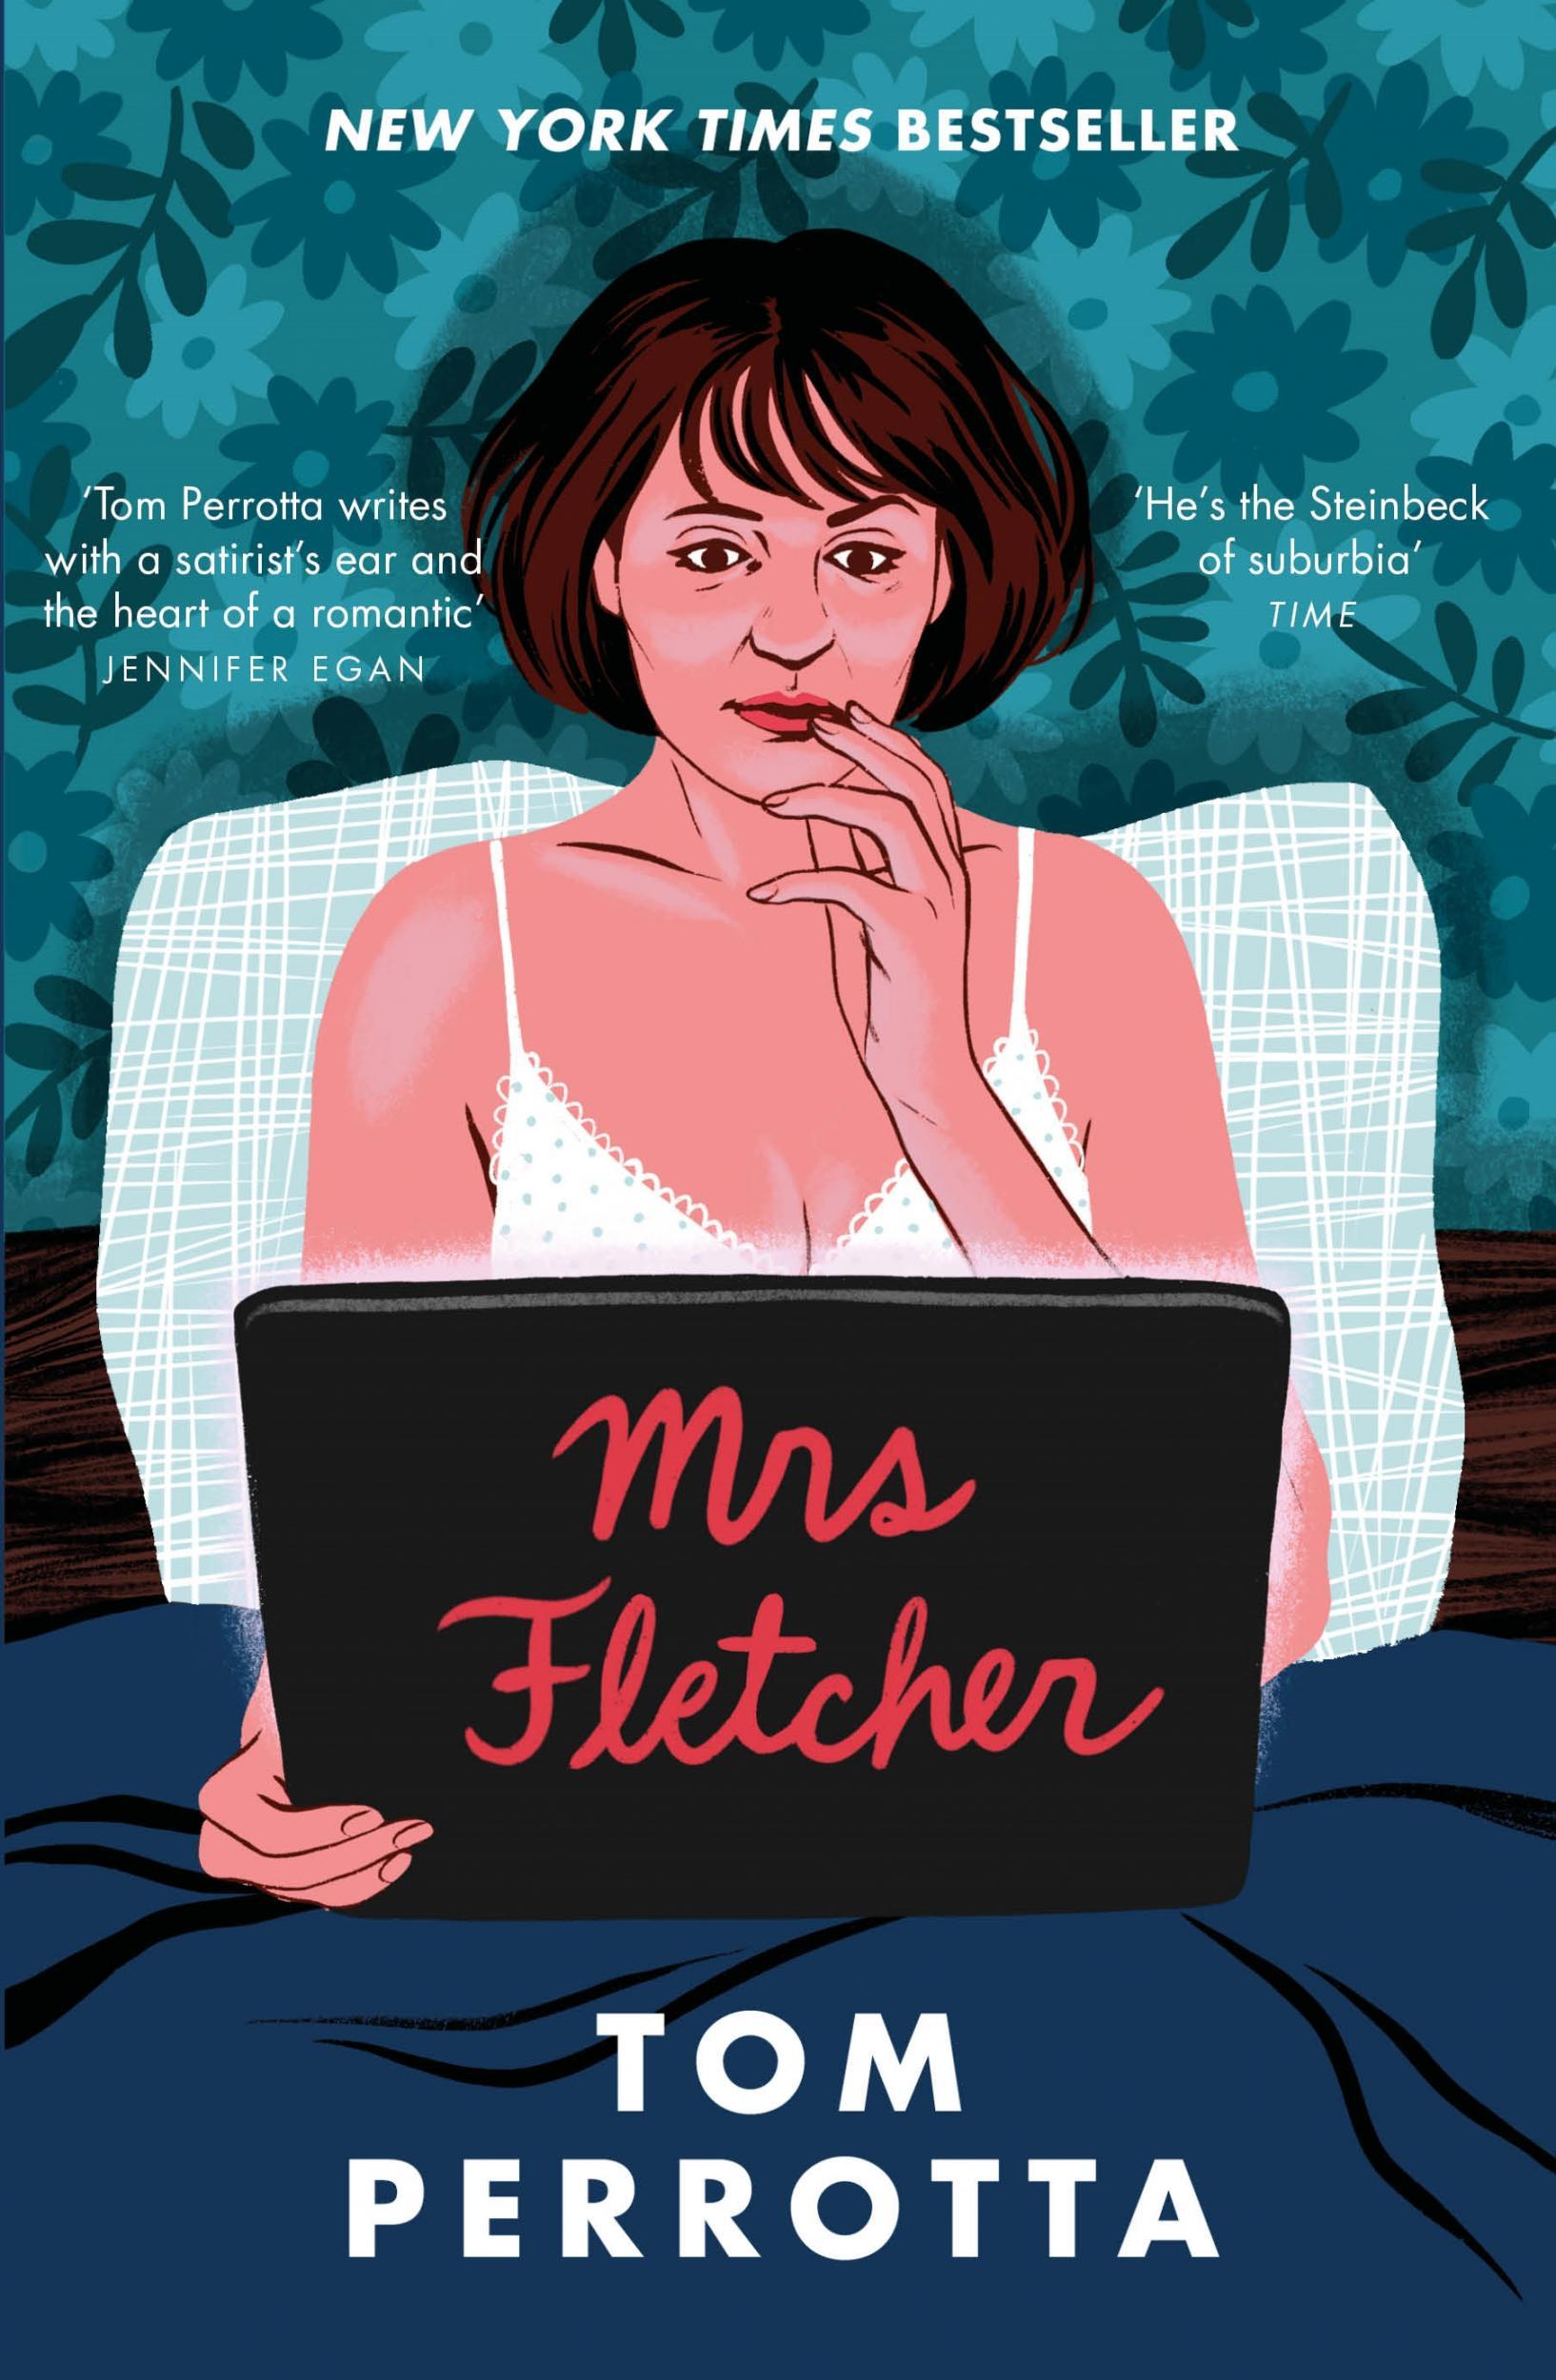 ‘Mrs Fletcher’ by Tom Perrotta is out in May